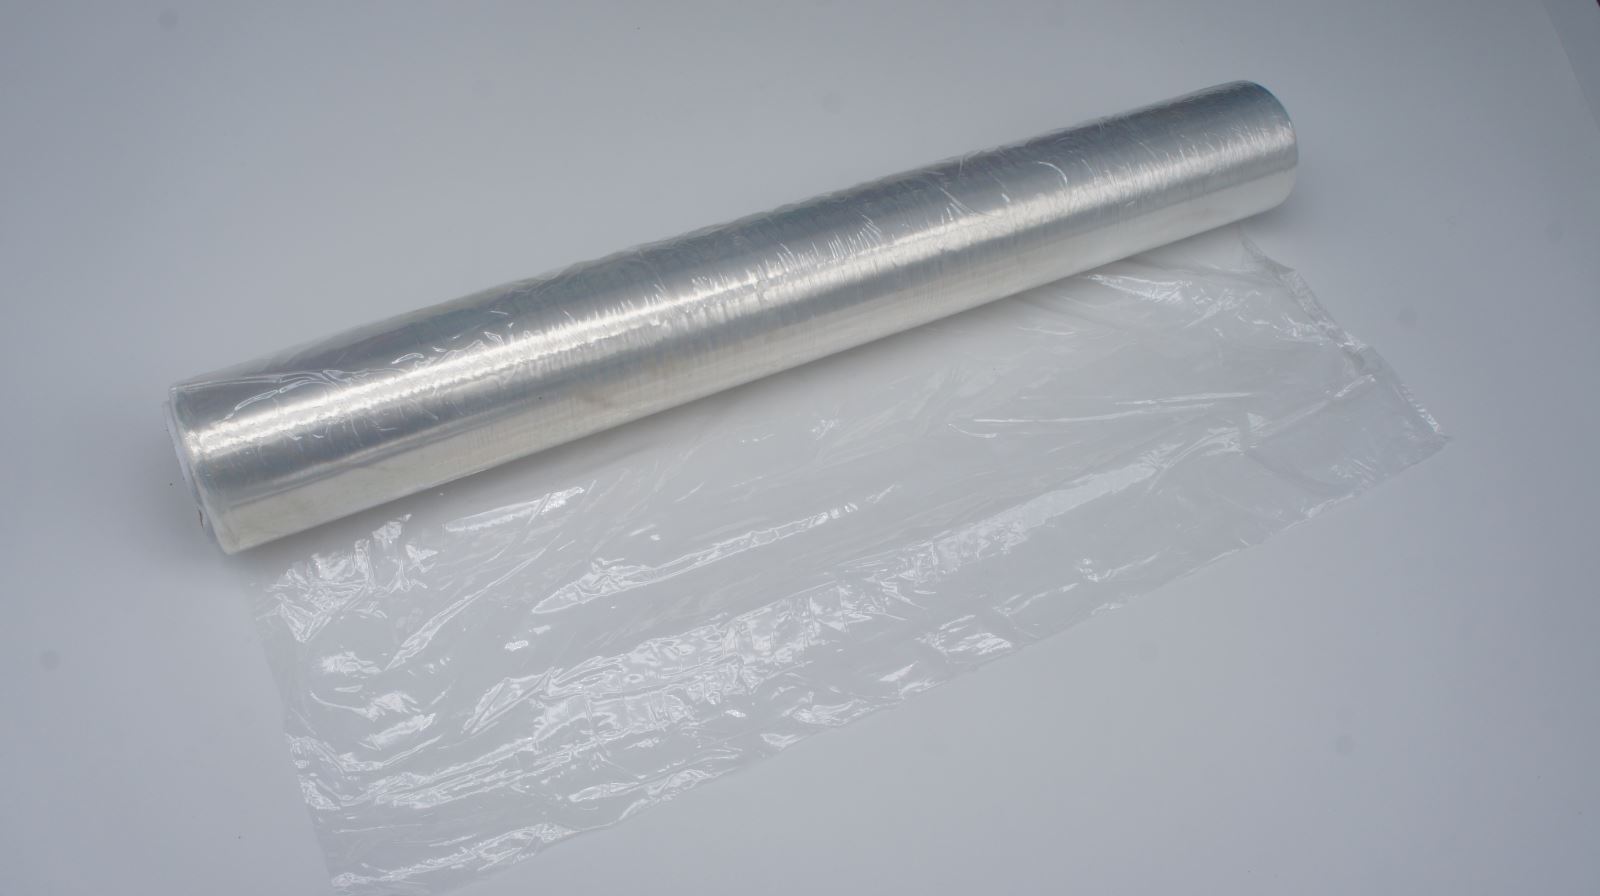 industrial cling wrap